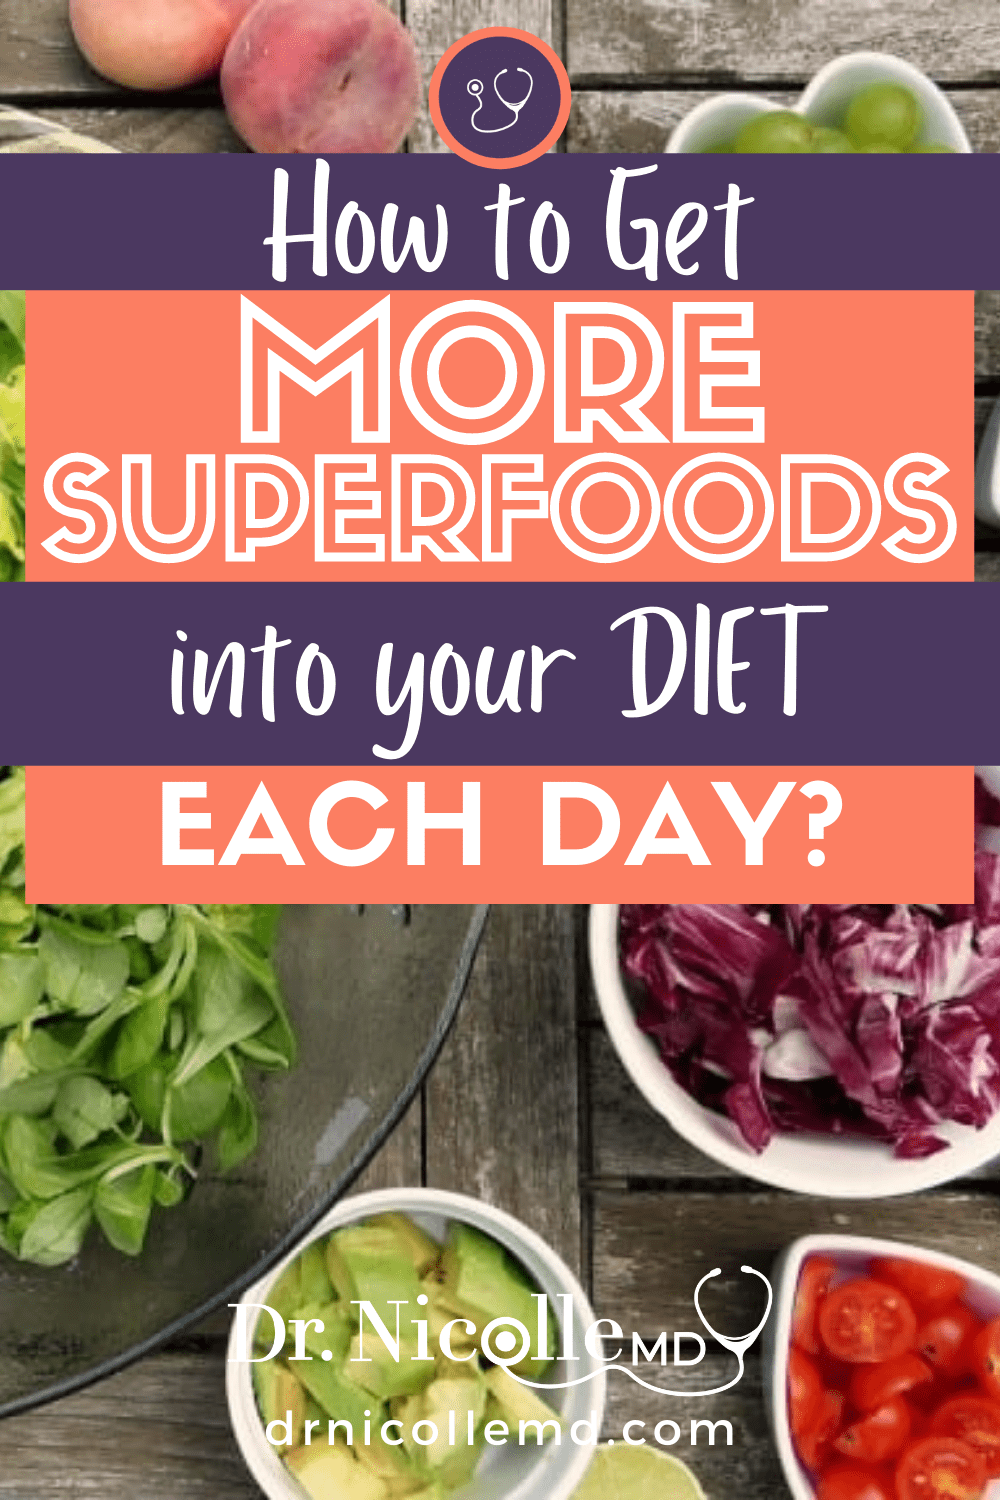 How to Get More Superfoods Into Your Diet Each Day!